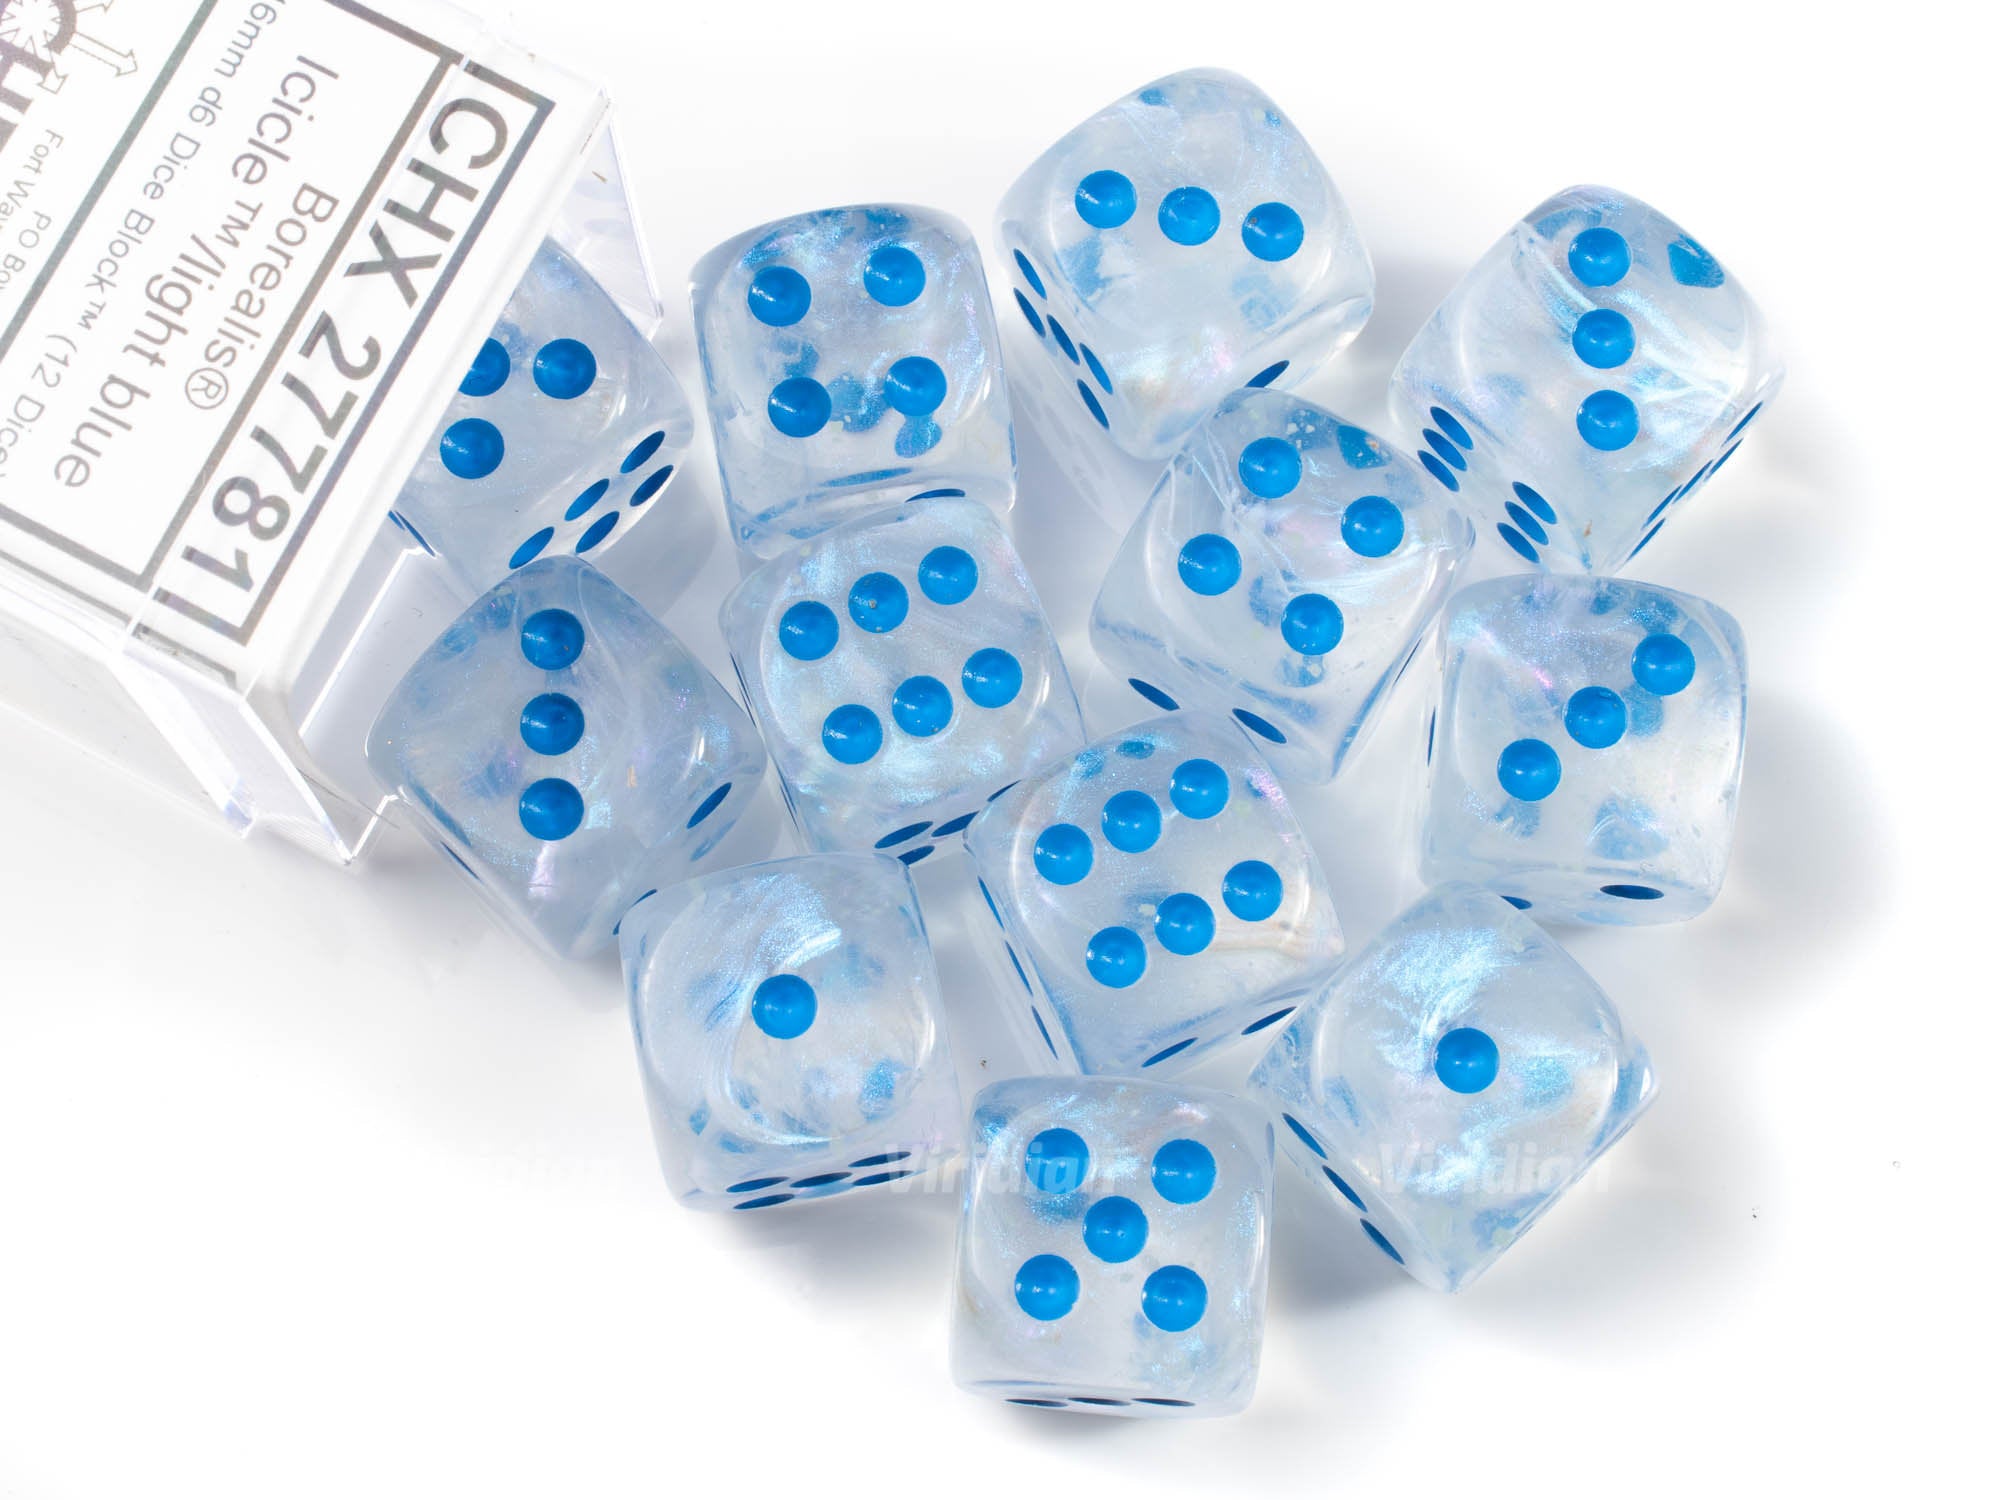 Borealis Icicle Luminary | White, Clear, Blue Iridescent | D6 Block | Chessex Dice (12)